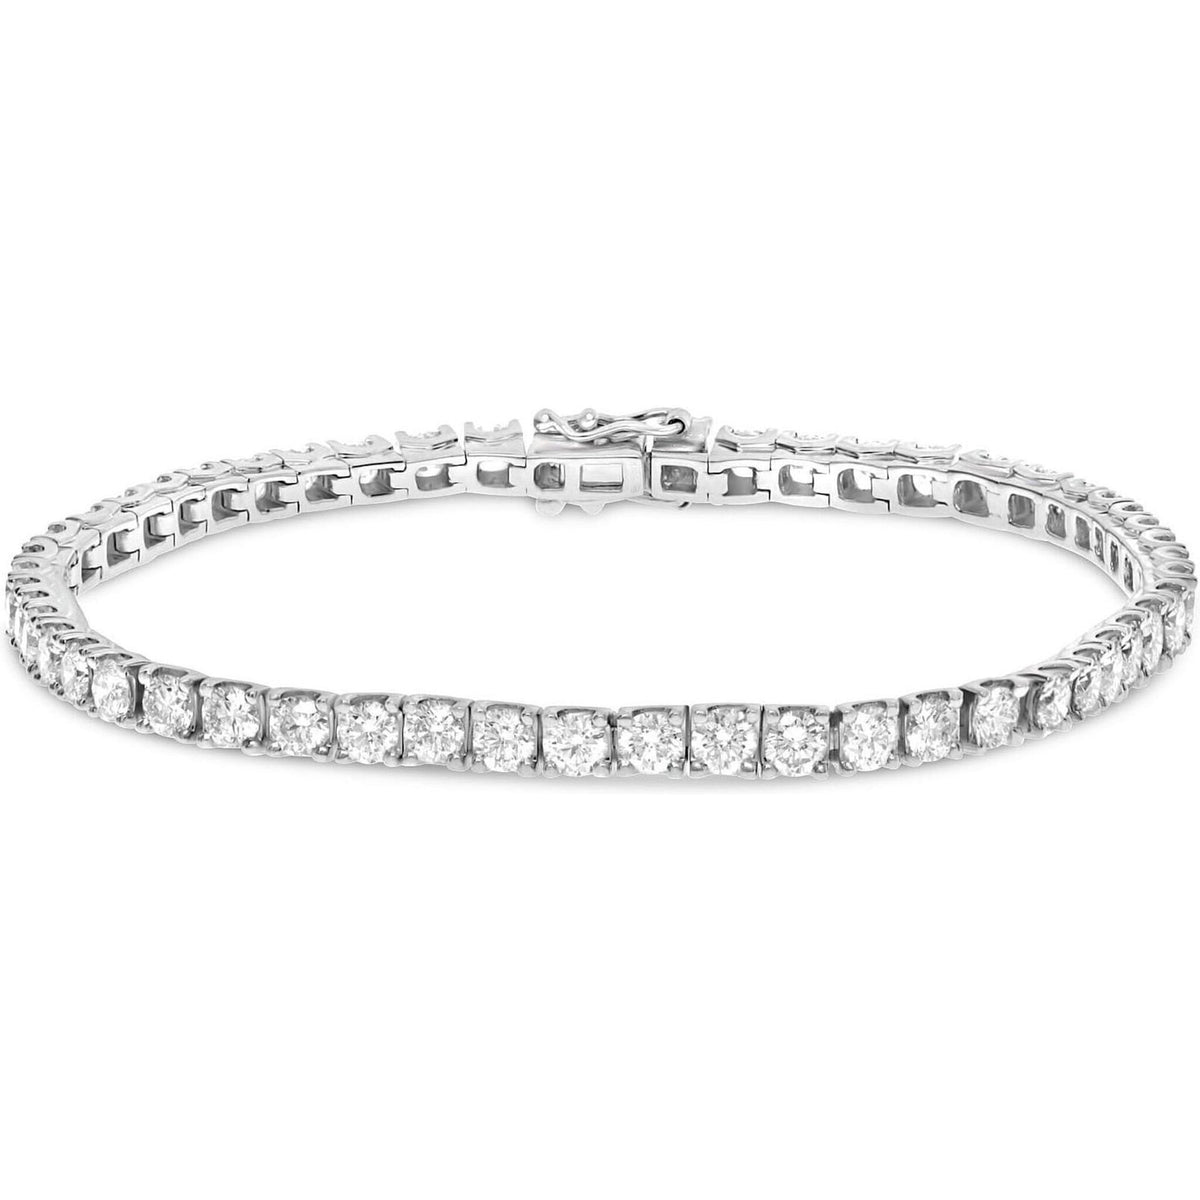 How Many Carats Should a Tennis Bracelet Be? – Robinson's Jewelers